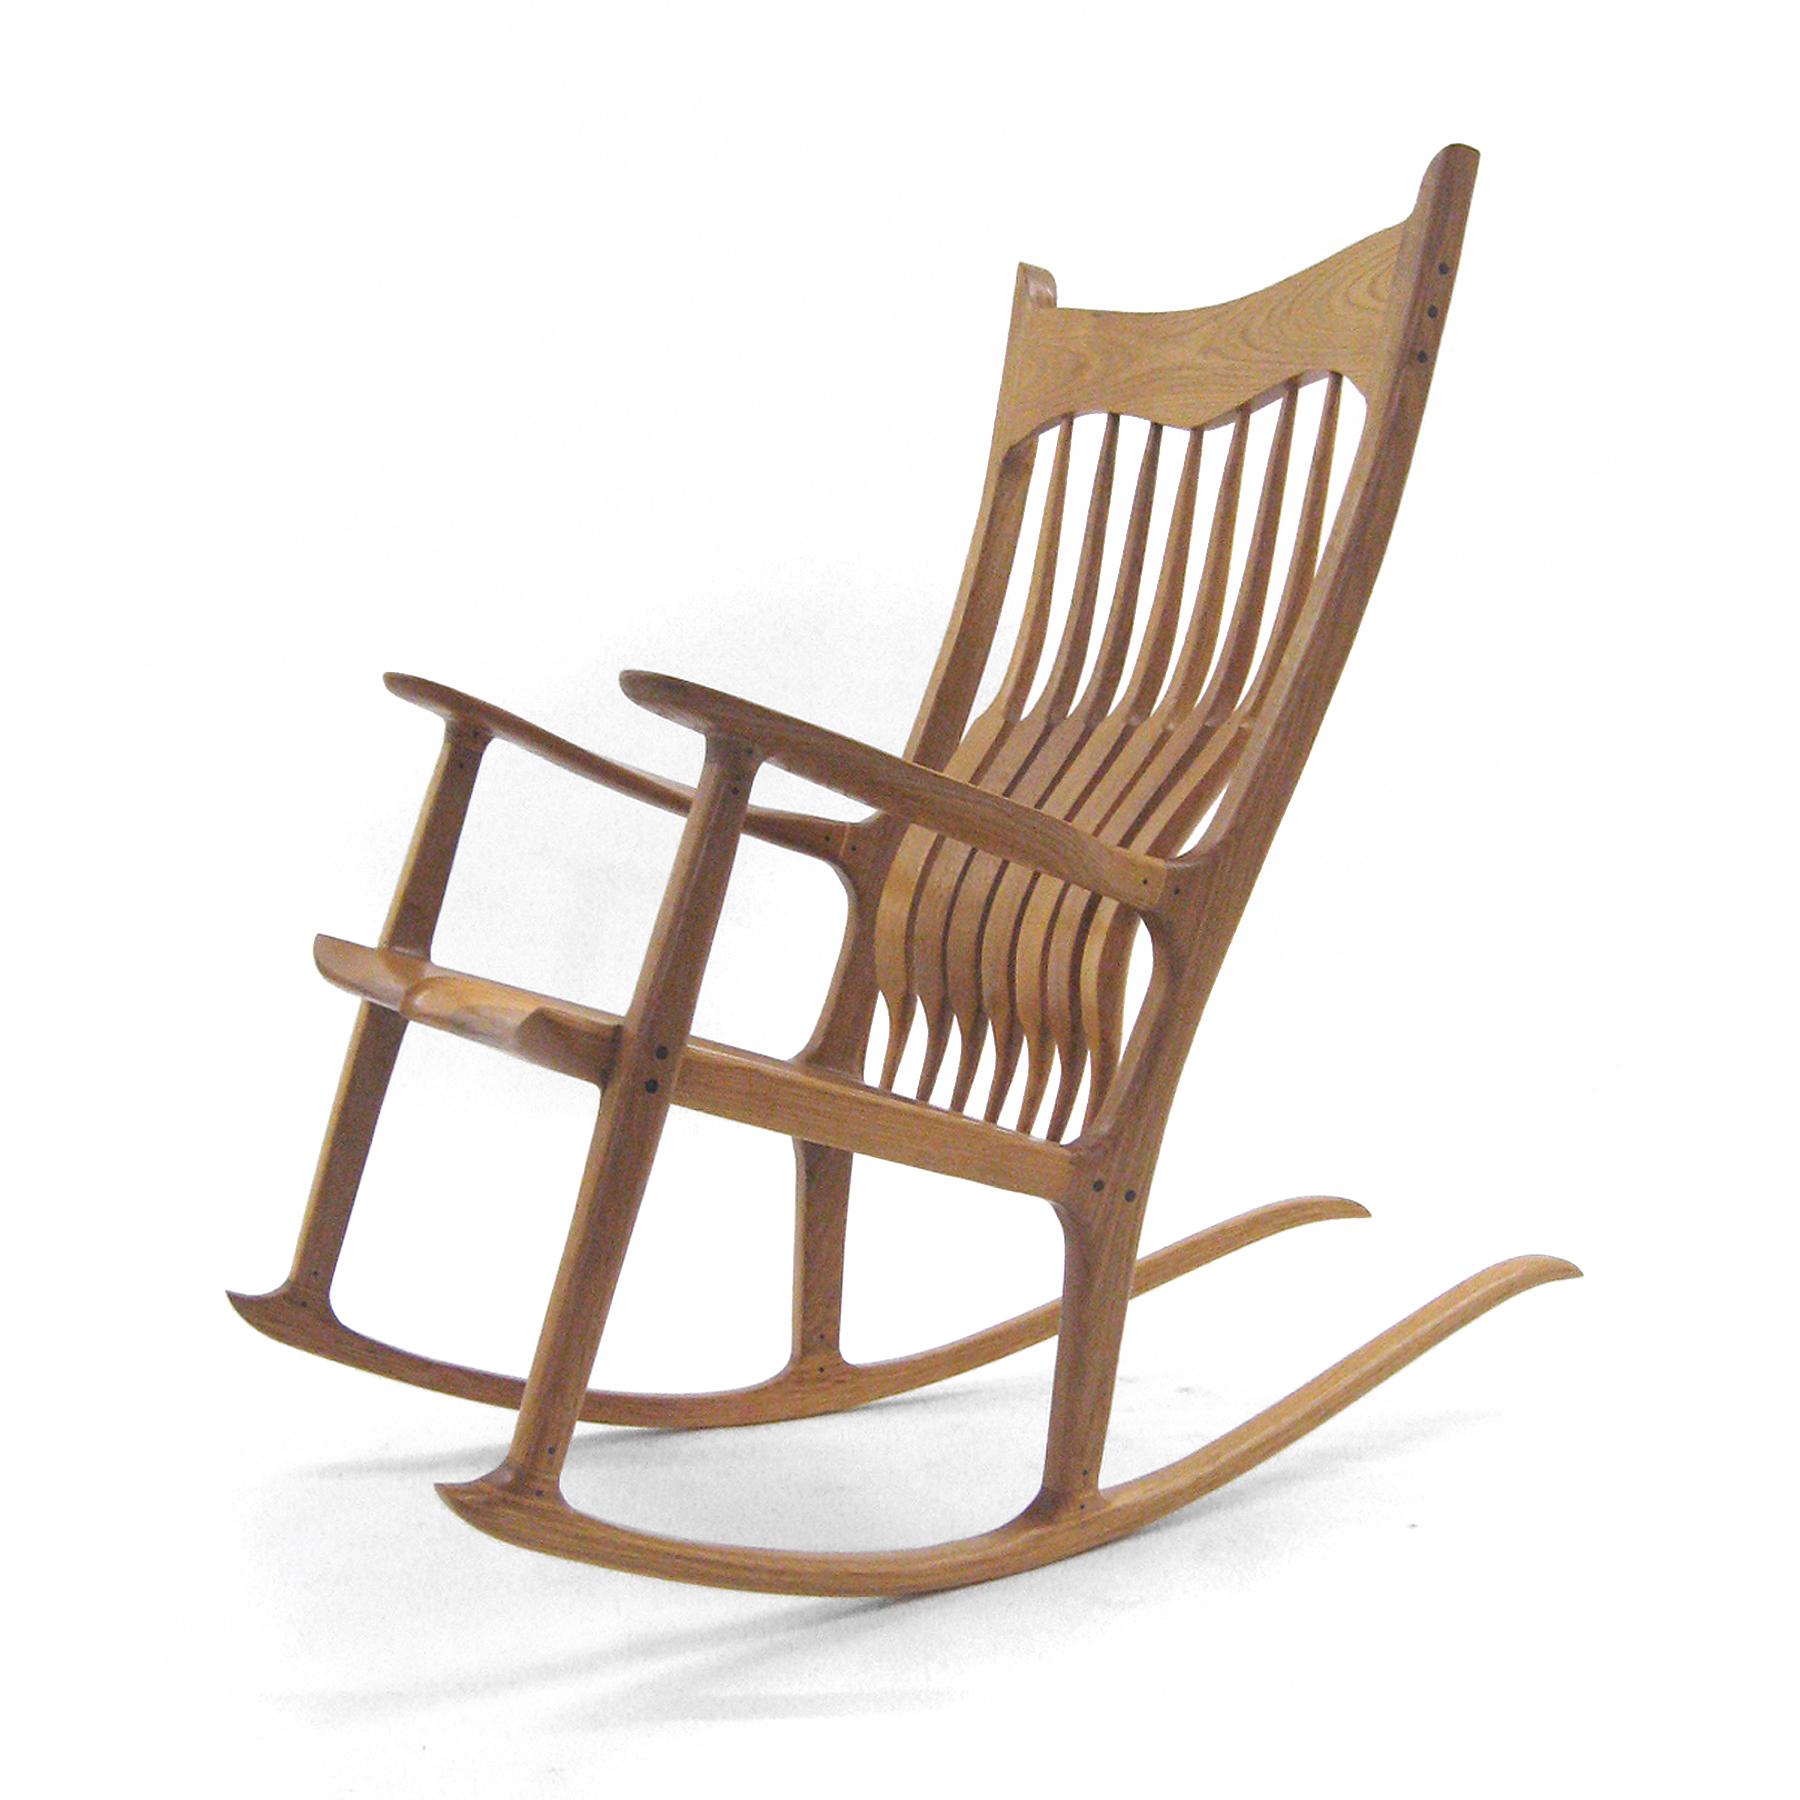 This rocking chair by Harold Dodson is based on the famous design by Sam Maloof. The craftsmanship is impeccable and the comfort one is afforded when sitting in the chair is unparalleled.